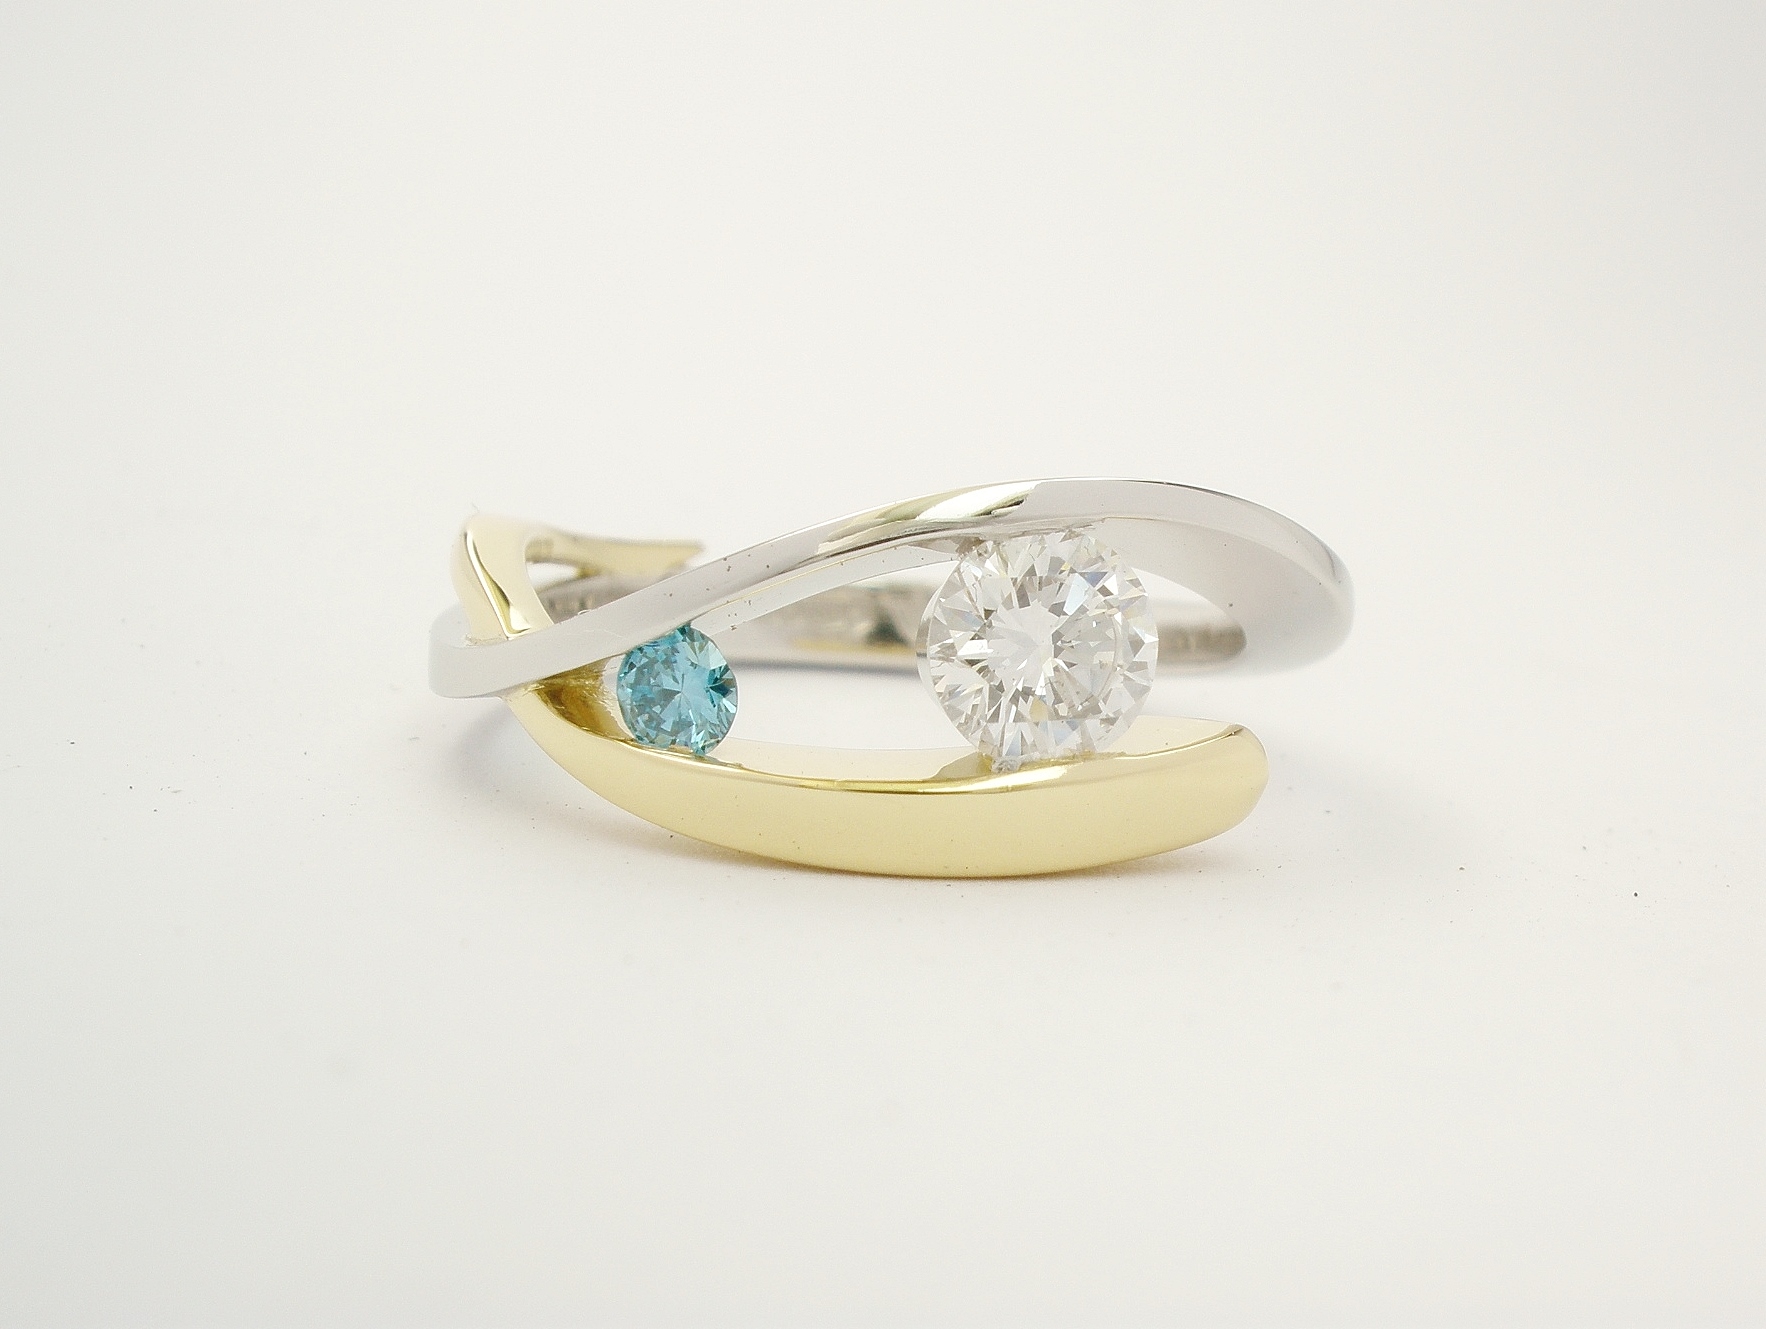 Platinum & 18ct. yellow gold open cross-over 2 stone white & sky blue round brilliant cut diamond ring. Ideal main diamond sizes from 0.35cts. to 0.60cts. & sky blue diamond in proportion.